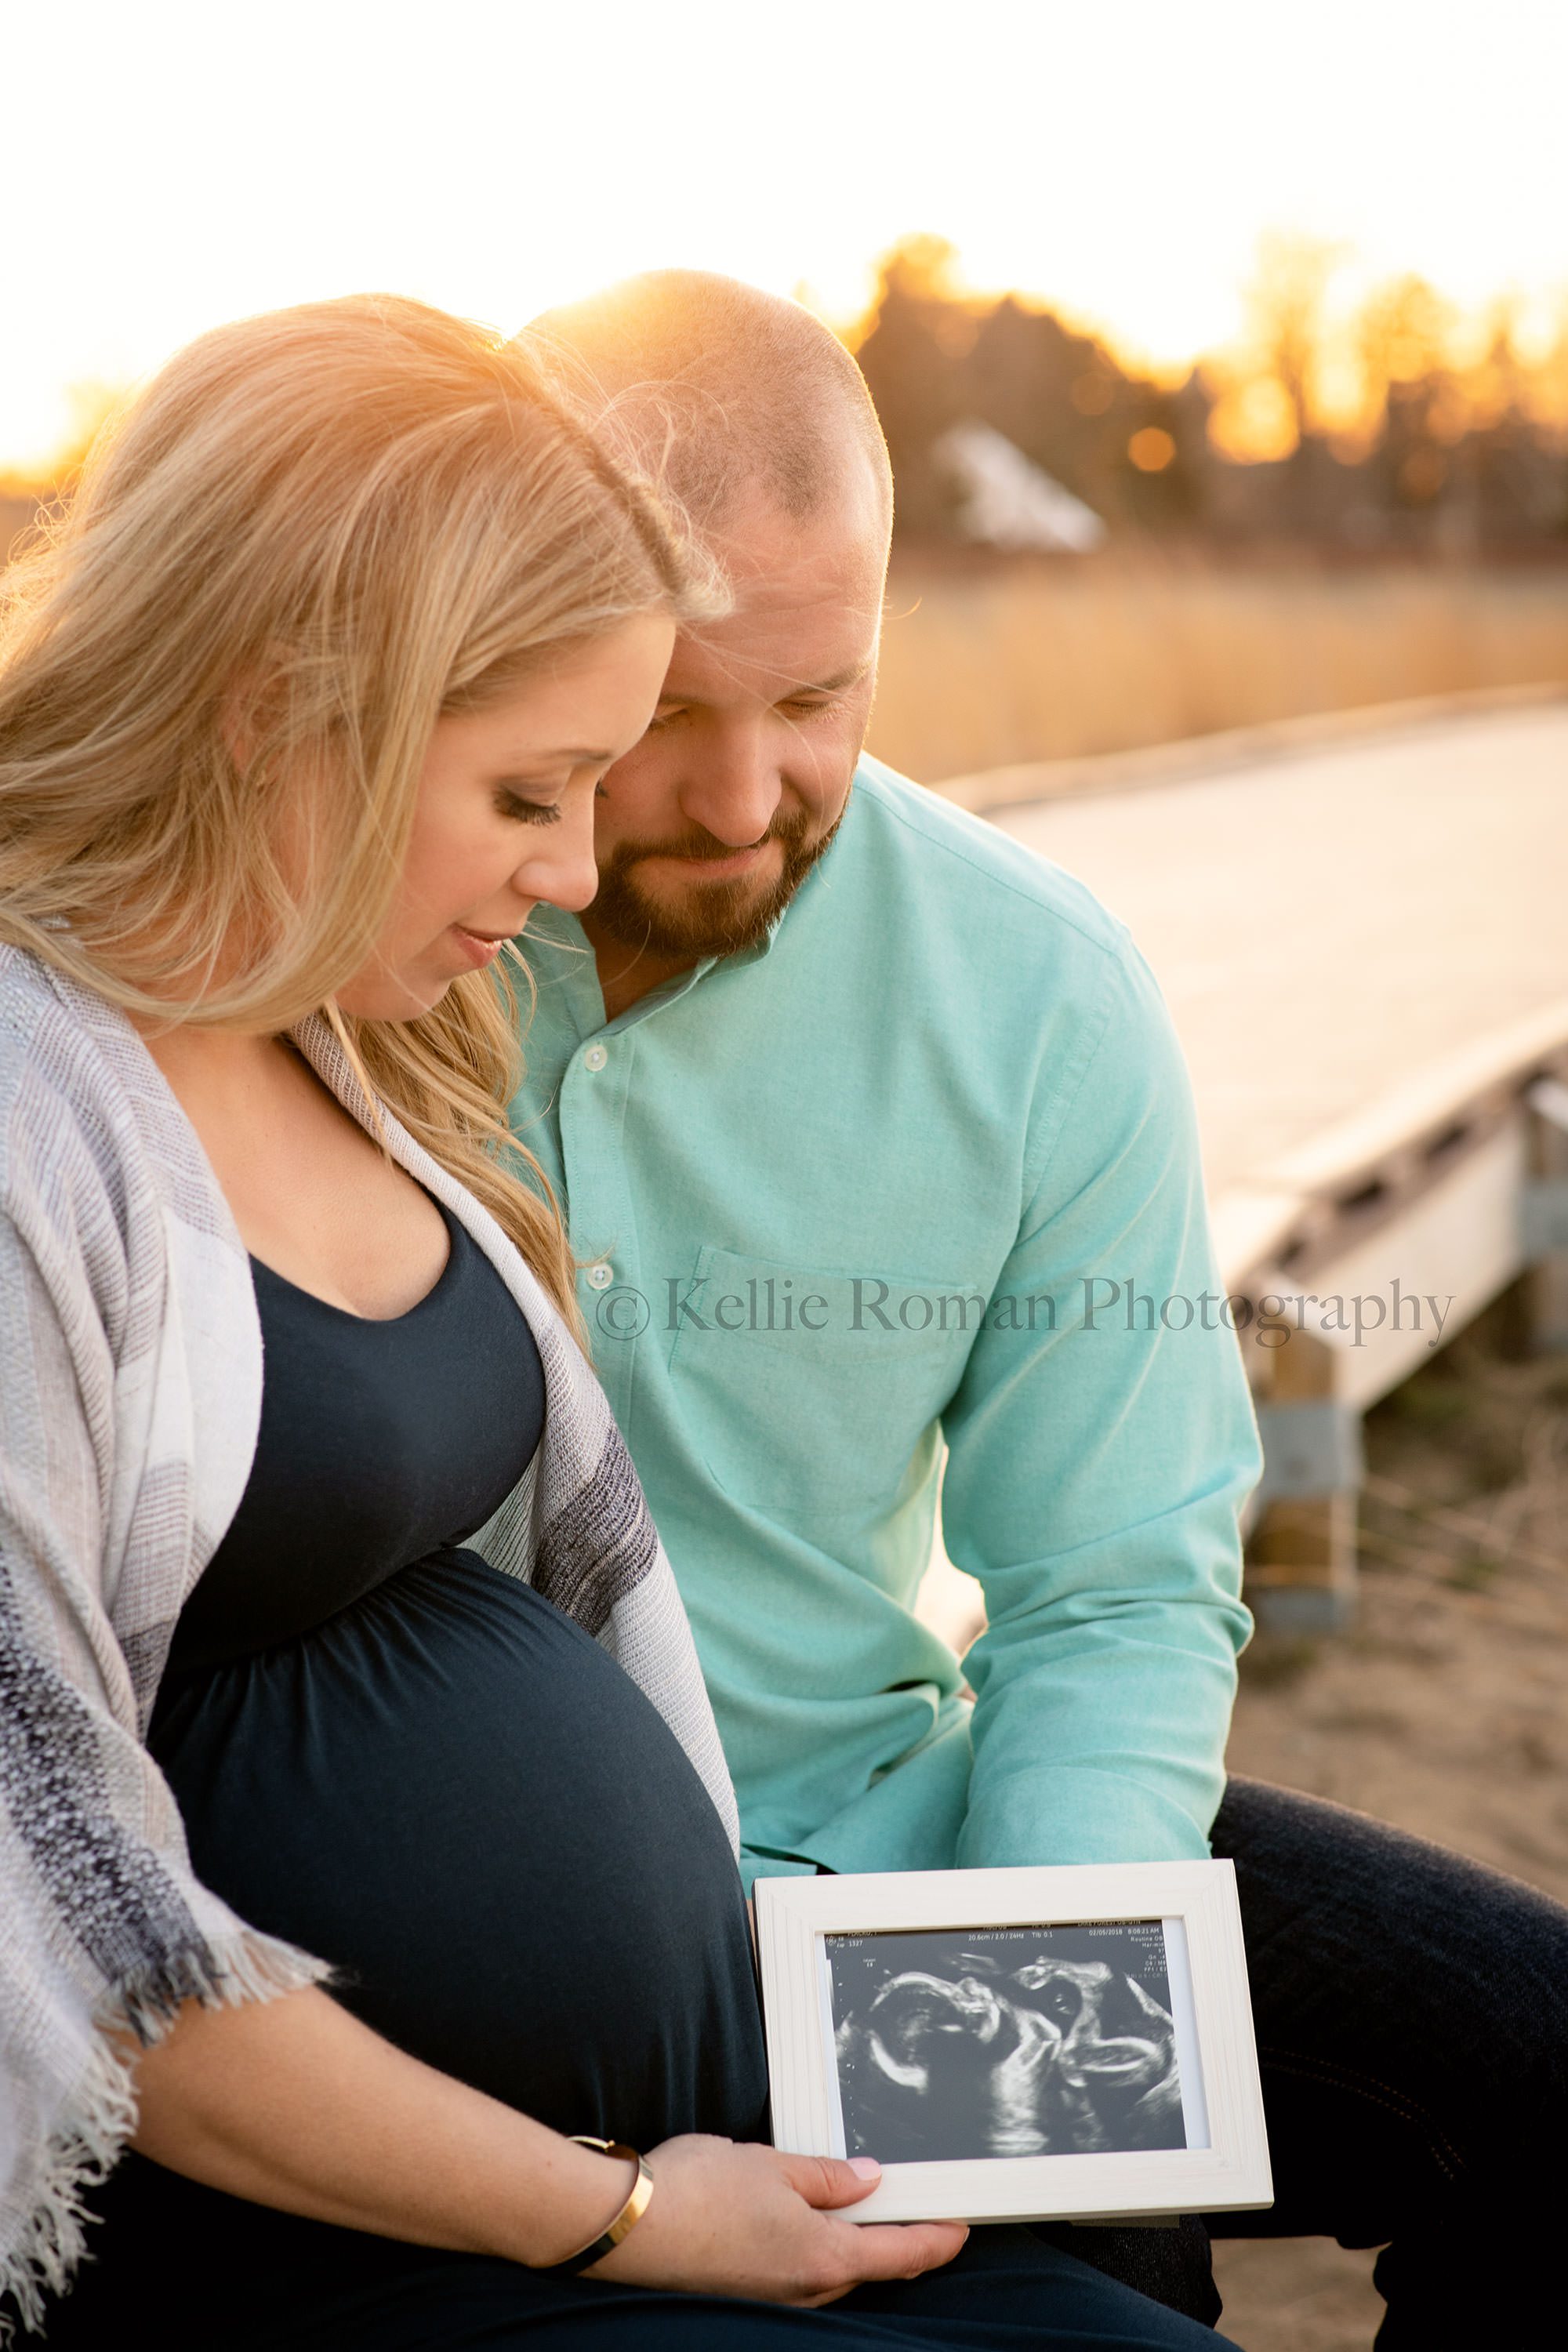 cold night at the beach a man and women husband and wife who are expecting their first newborn from Illinois are on a kenosha Wisconsin beach sitting on a wood walkway. They are holding a framed photo of an ultrasound pictures and looking down at it. The sunlight is behind them while on the beach